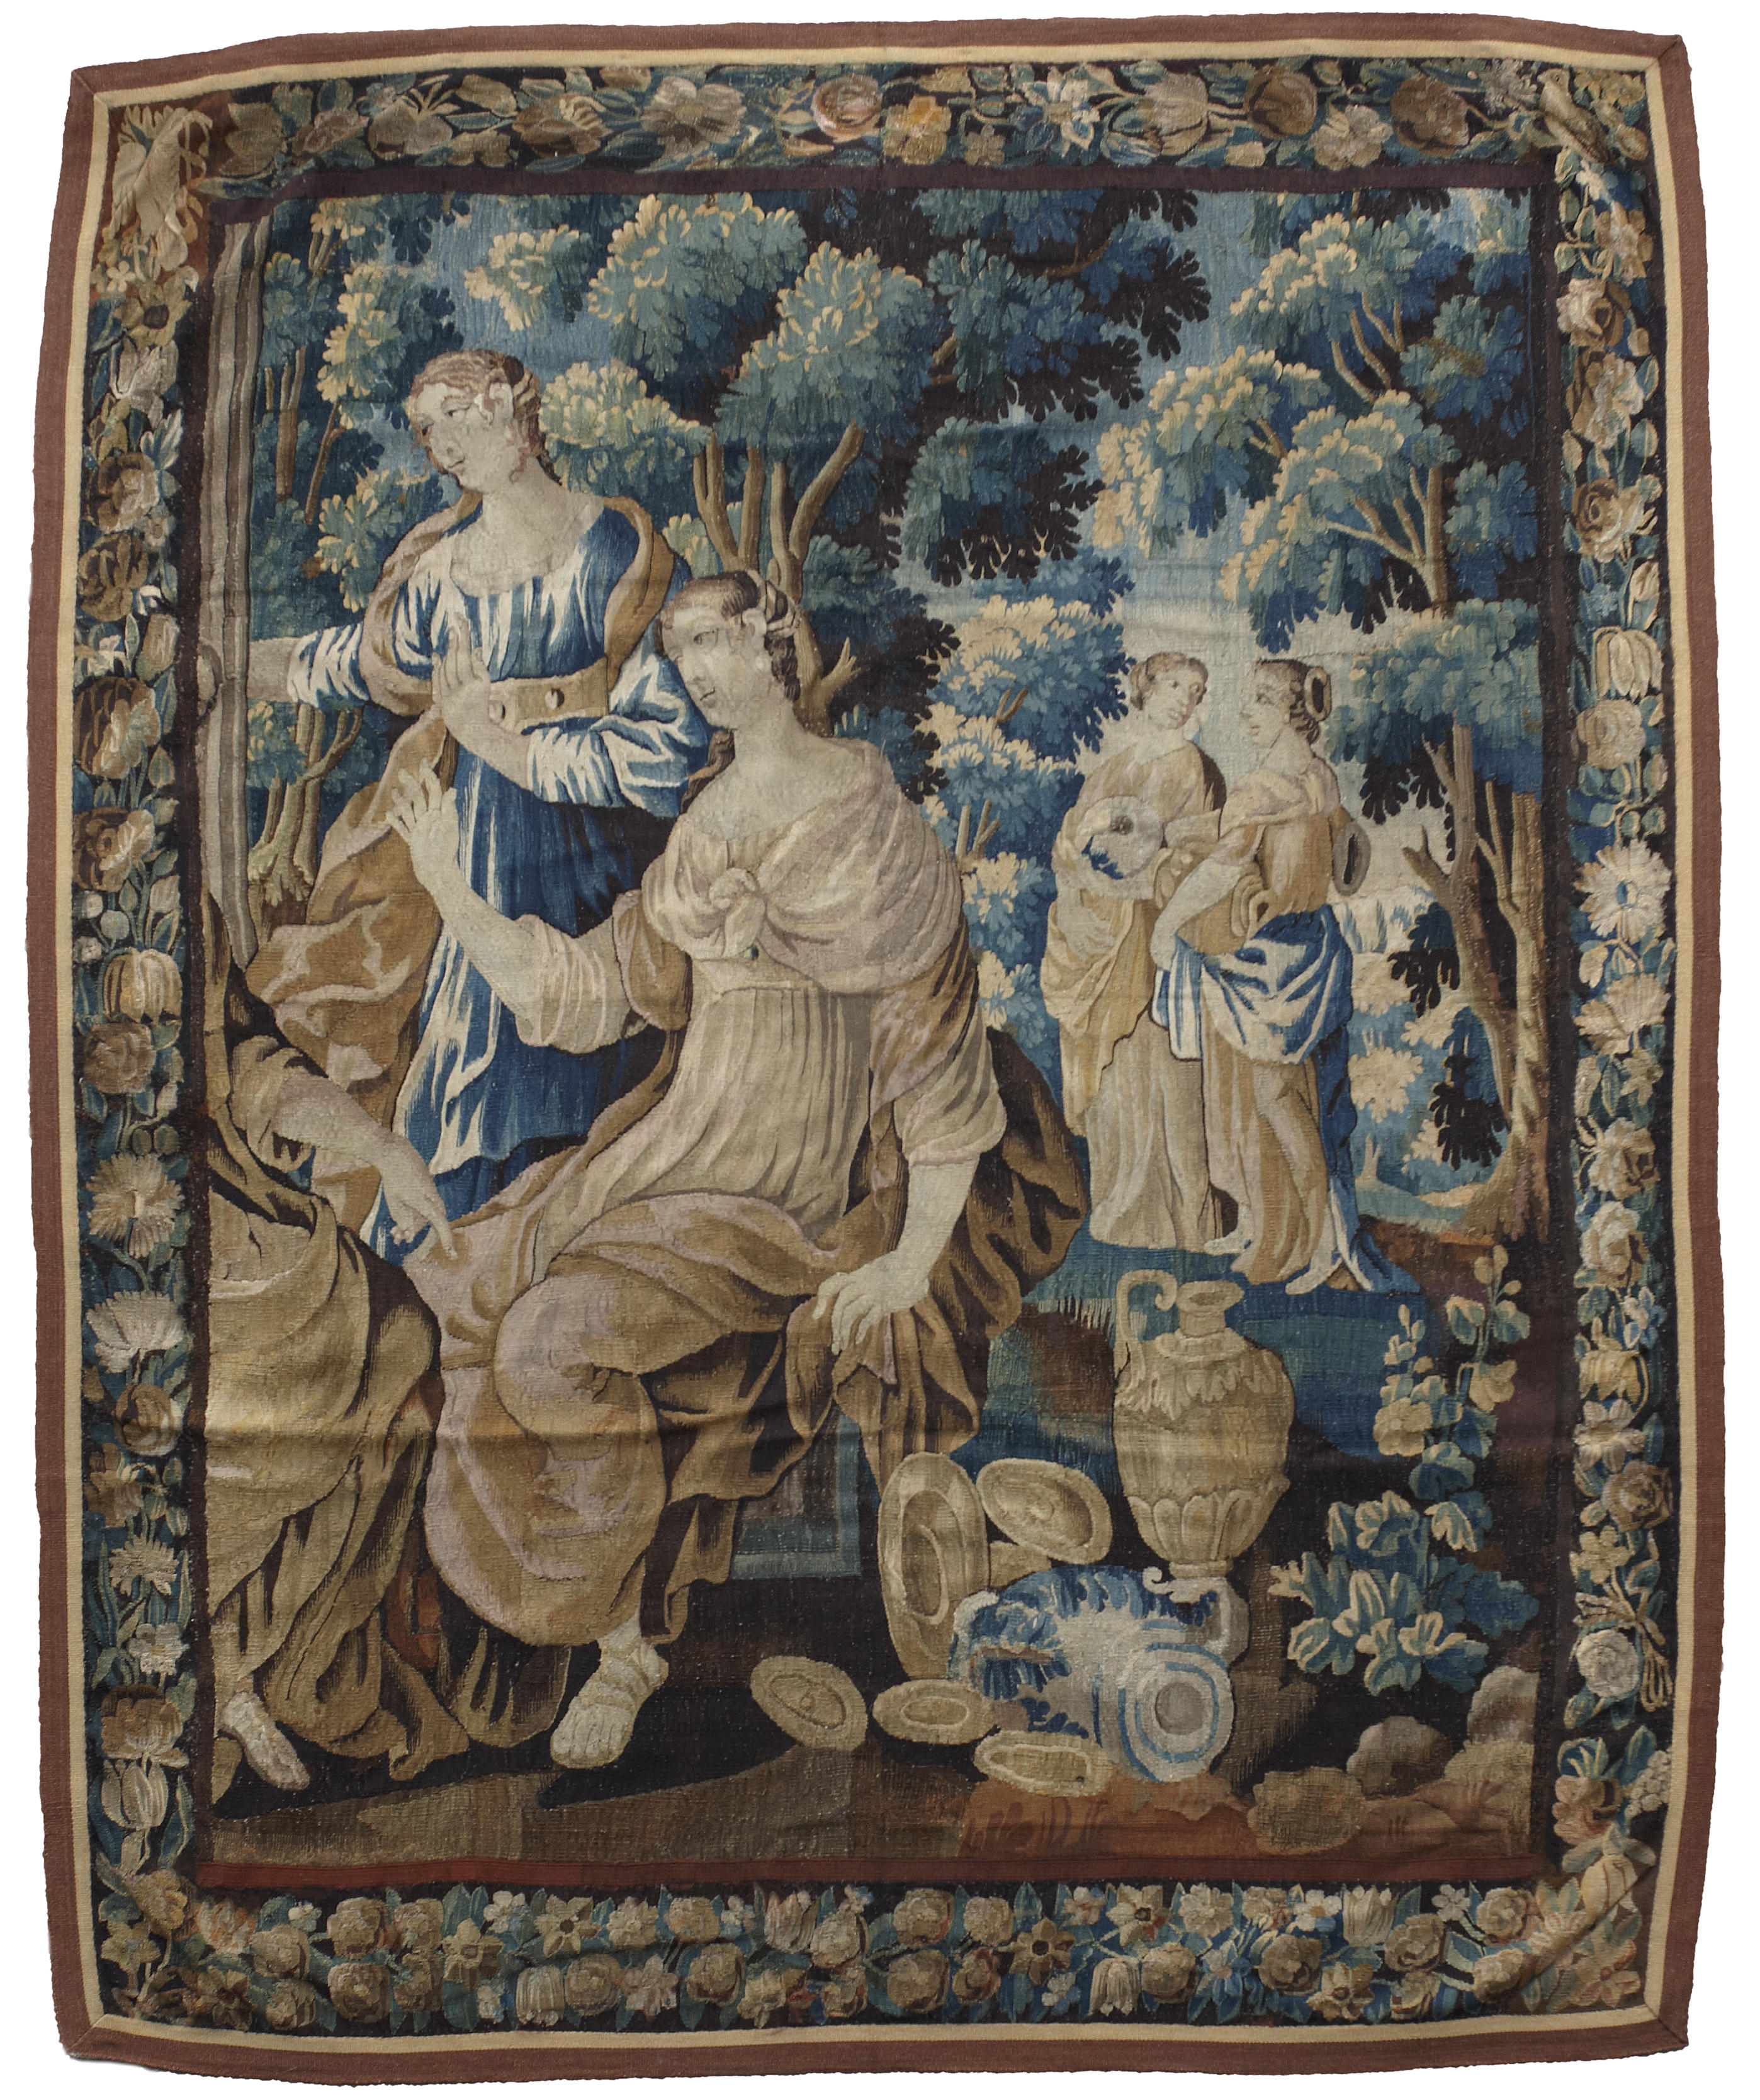 A Flemish Baroque tapestry early 129198